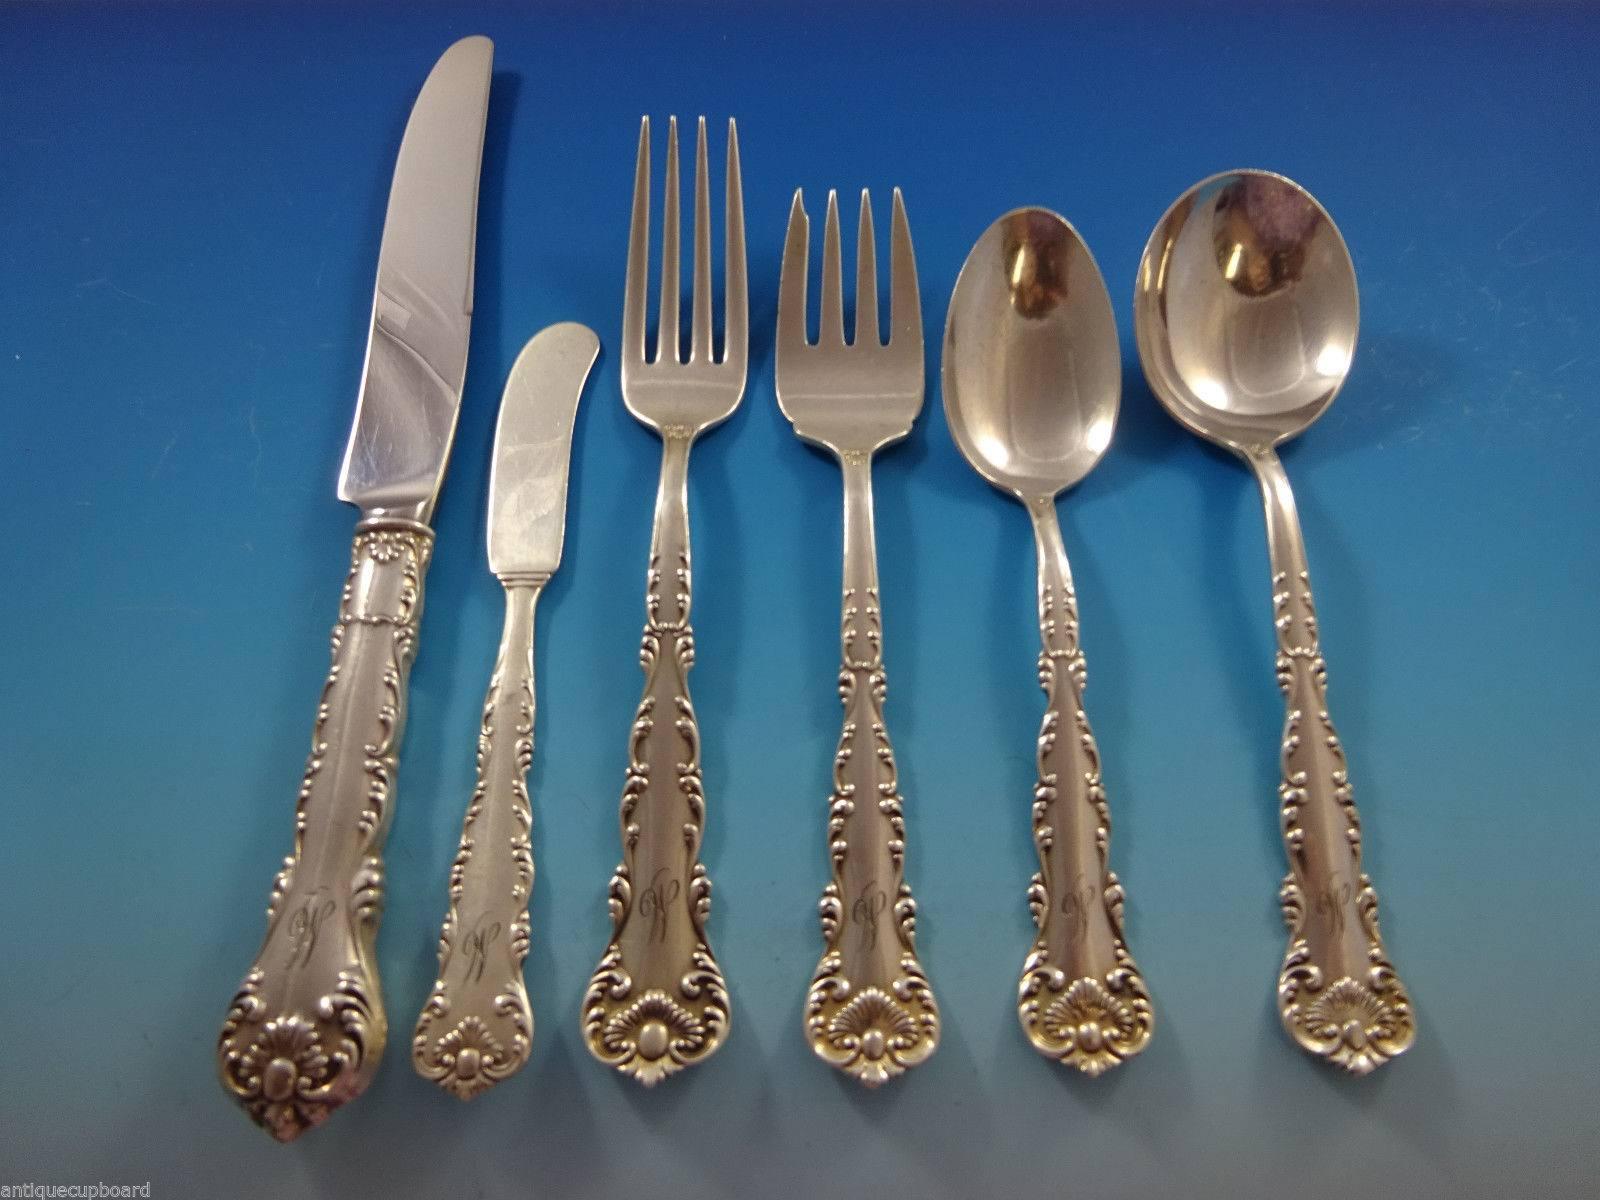 Kings Court by Frank Whiting sterling silver 76 piece set. This set includes:

12 knives, 9 1/8